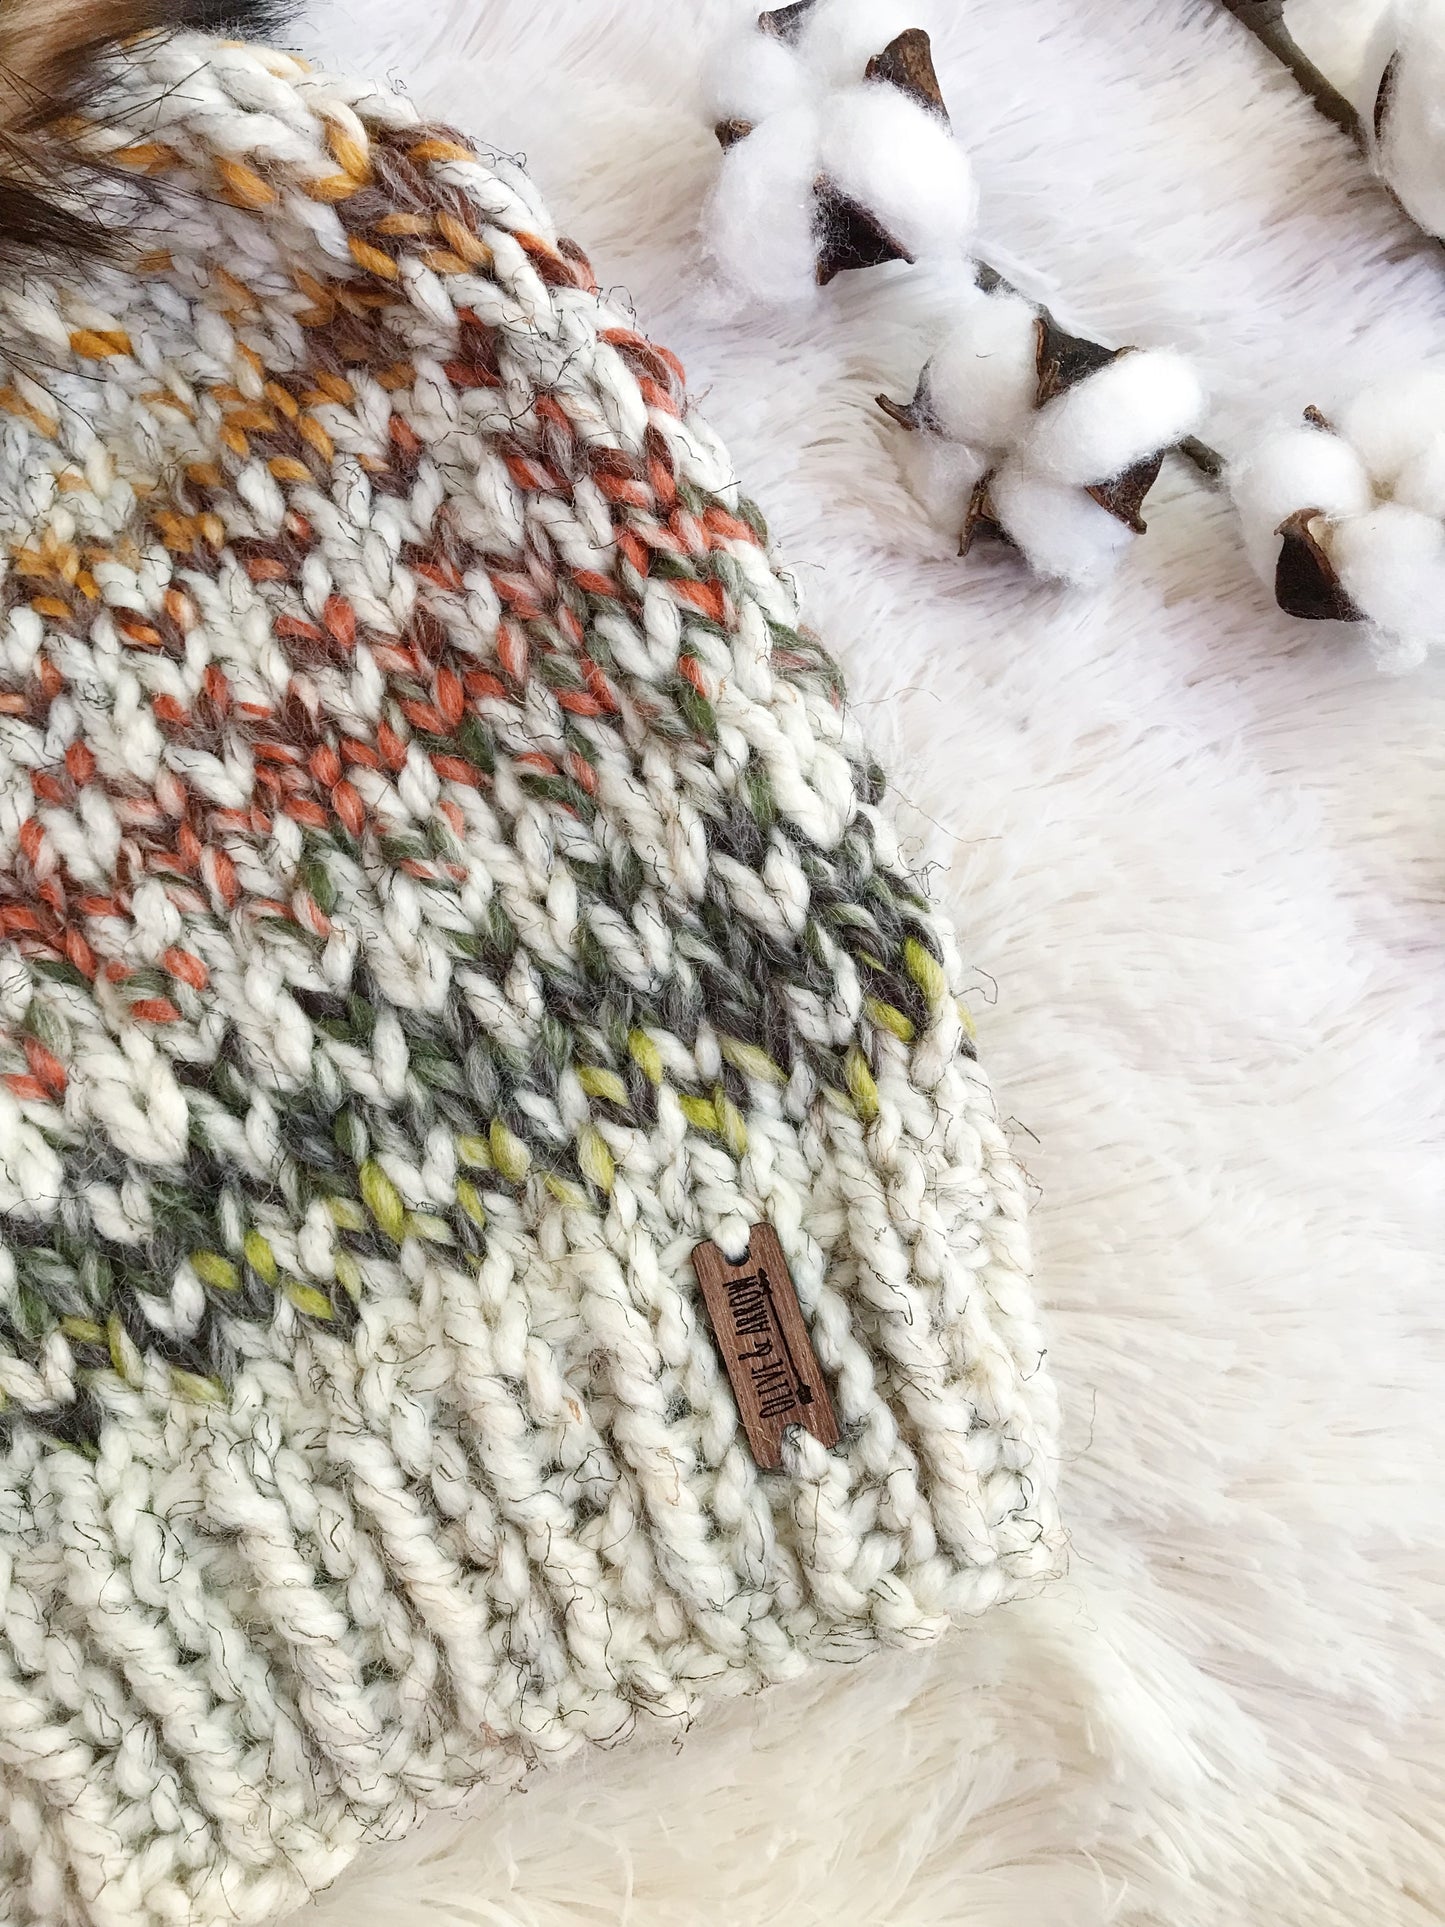 Adult Knitted Fair Isle Beanie with Faux Fur Pom Pom // The Hallowell